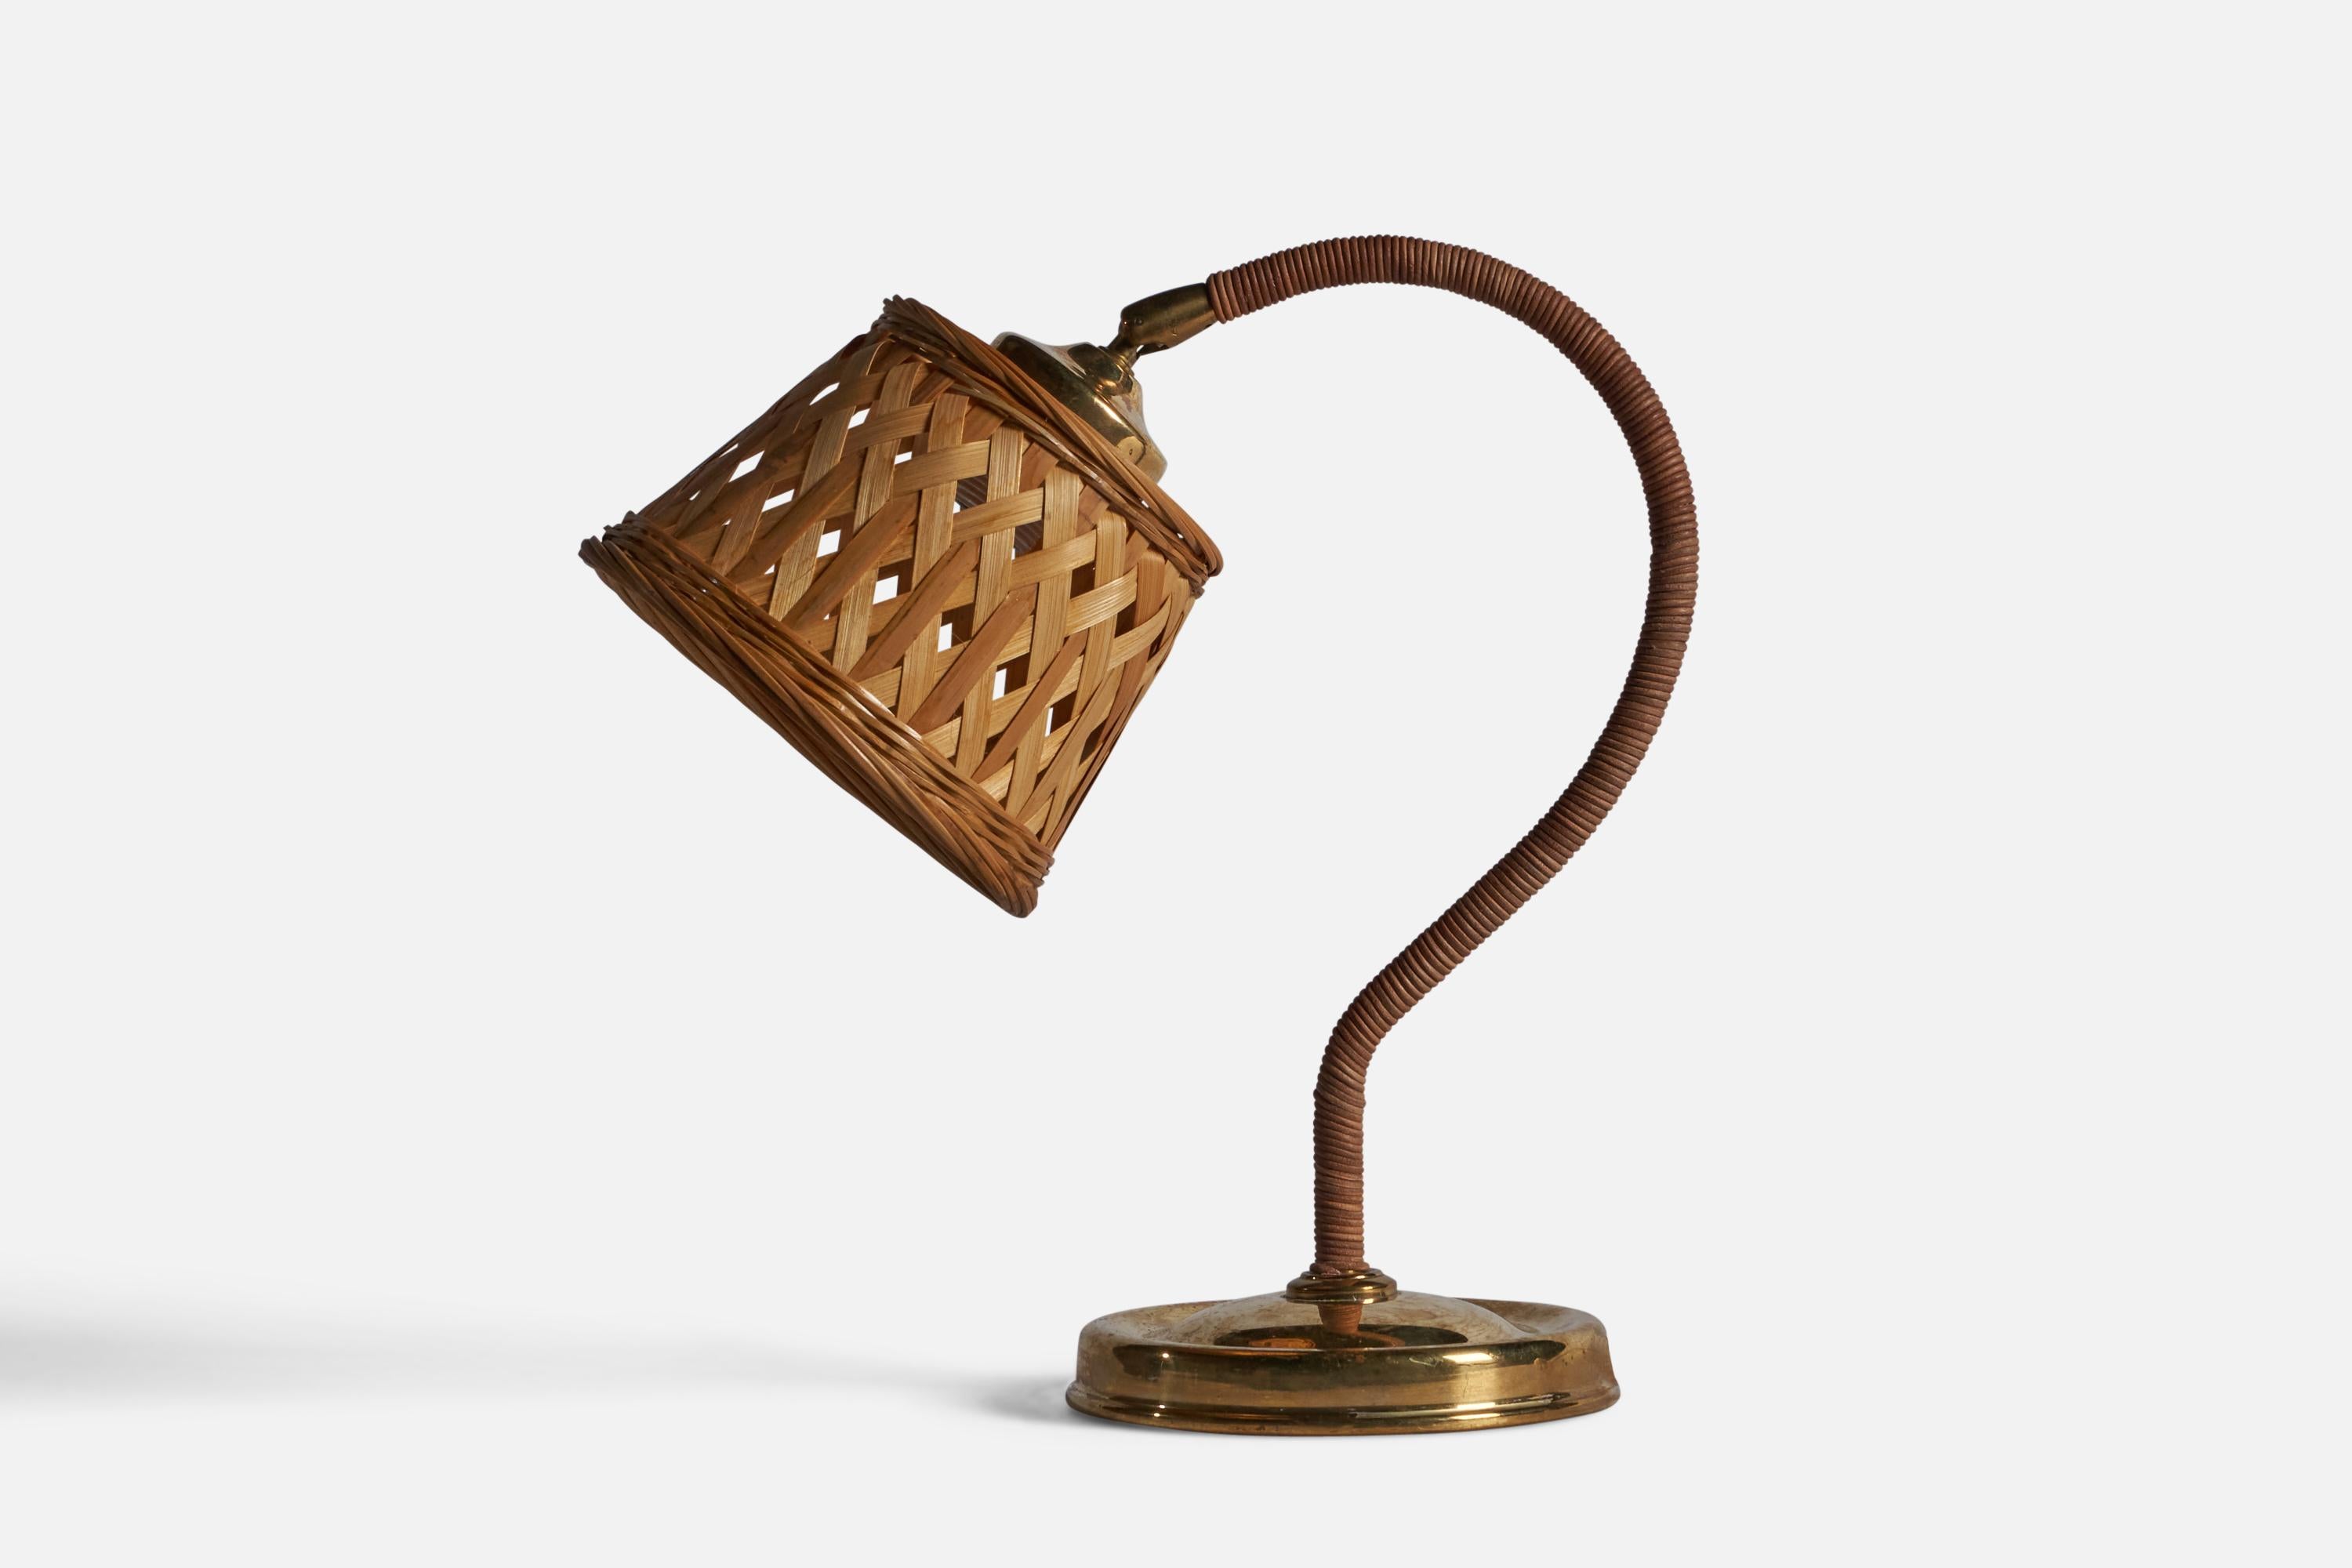 An adjustable brass and rattan table lamp, designed and produced in Sweden c. 1970s.

Overall Dimensions: 12.75